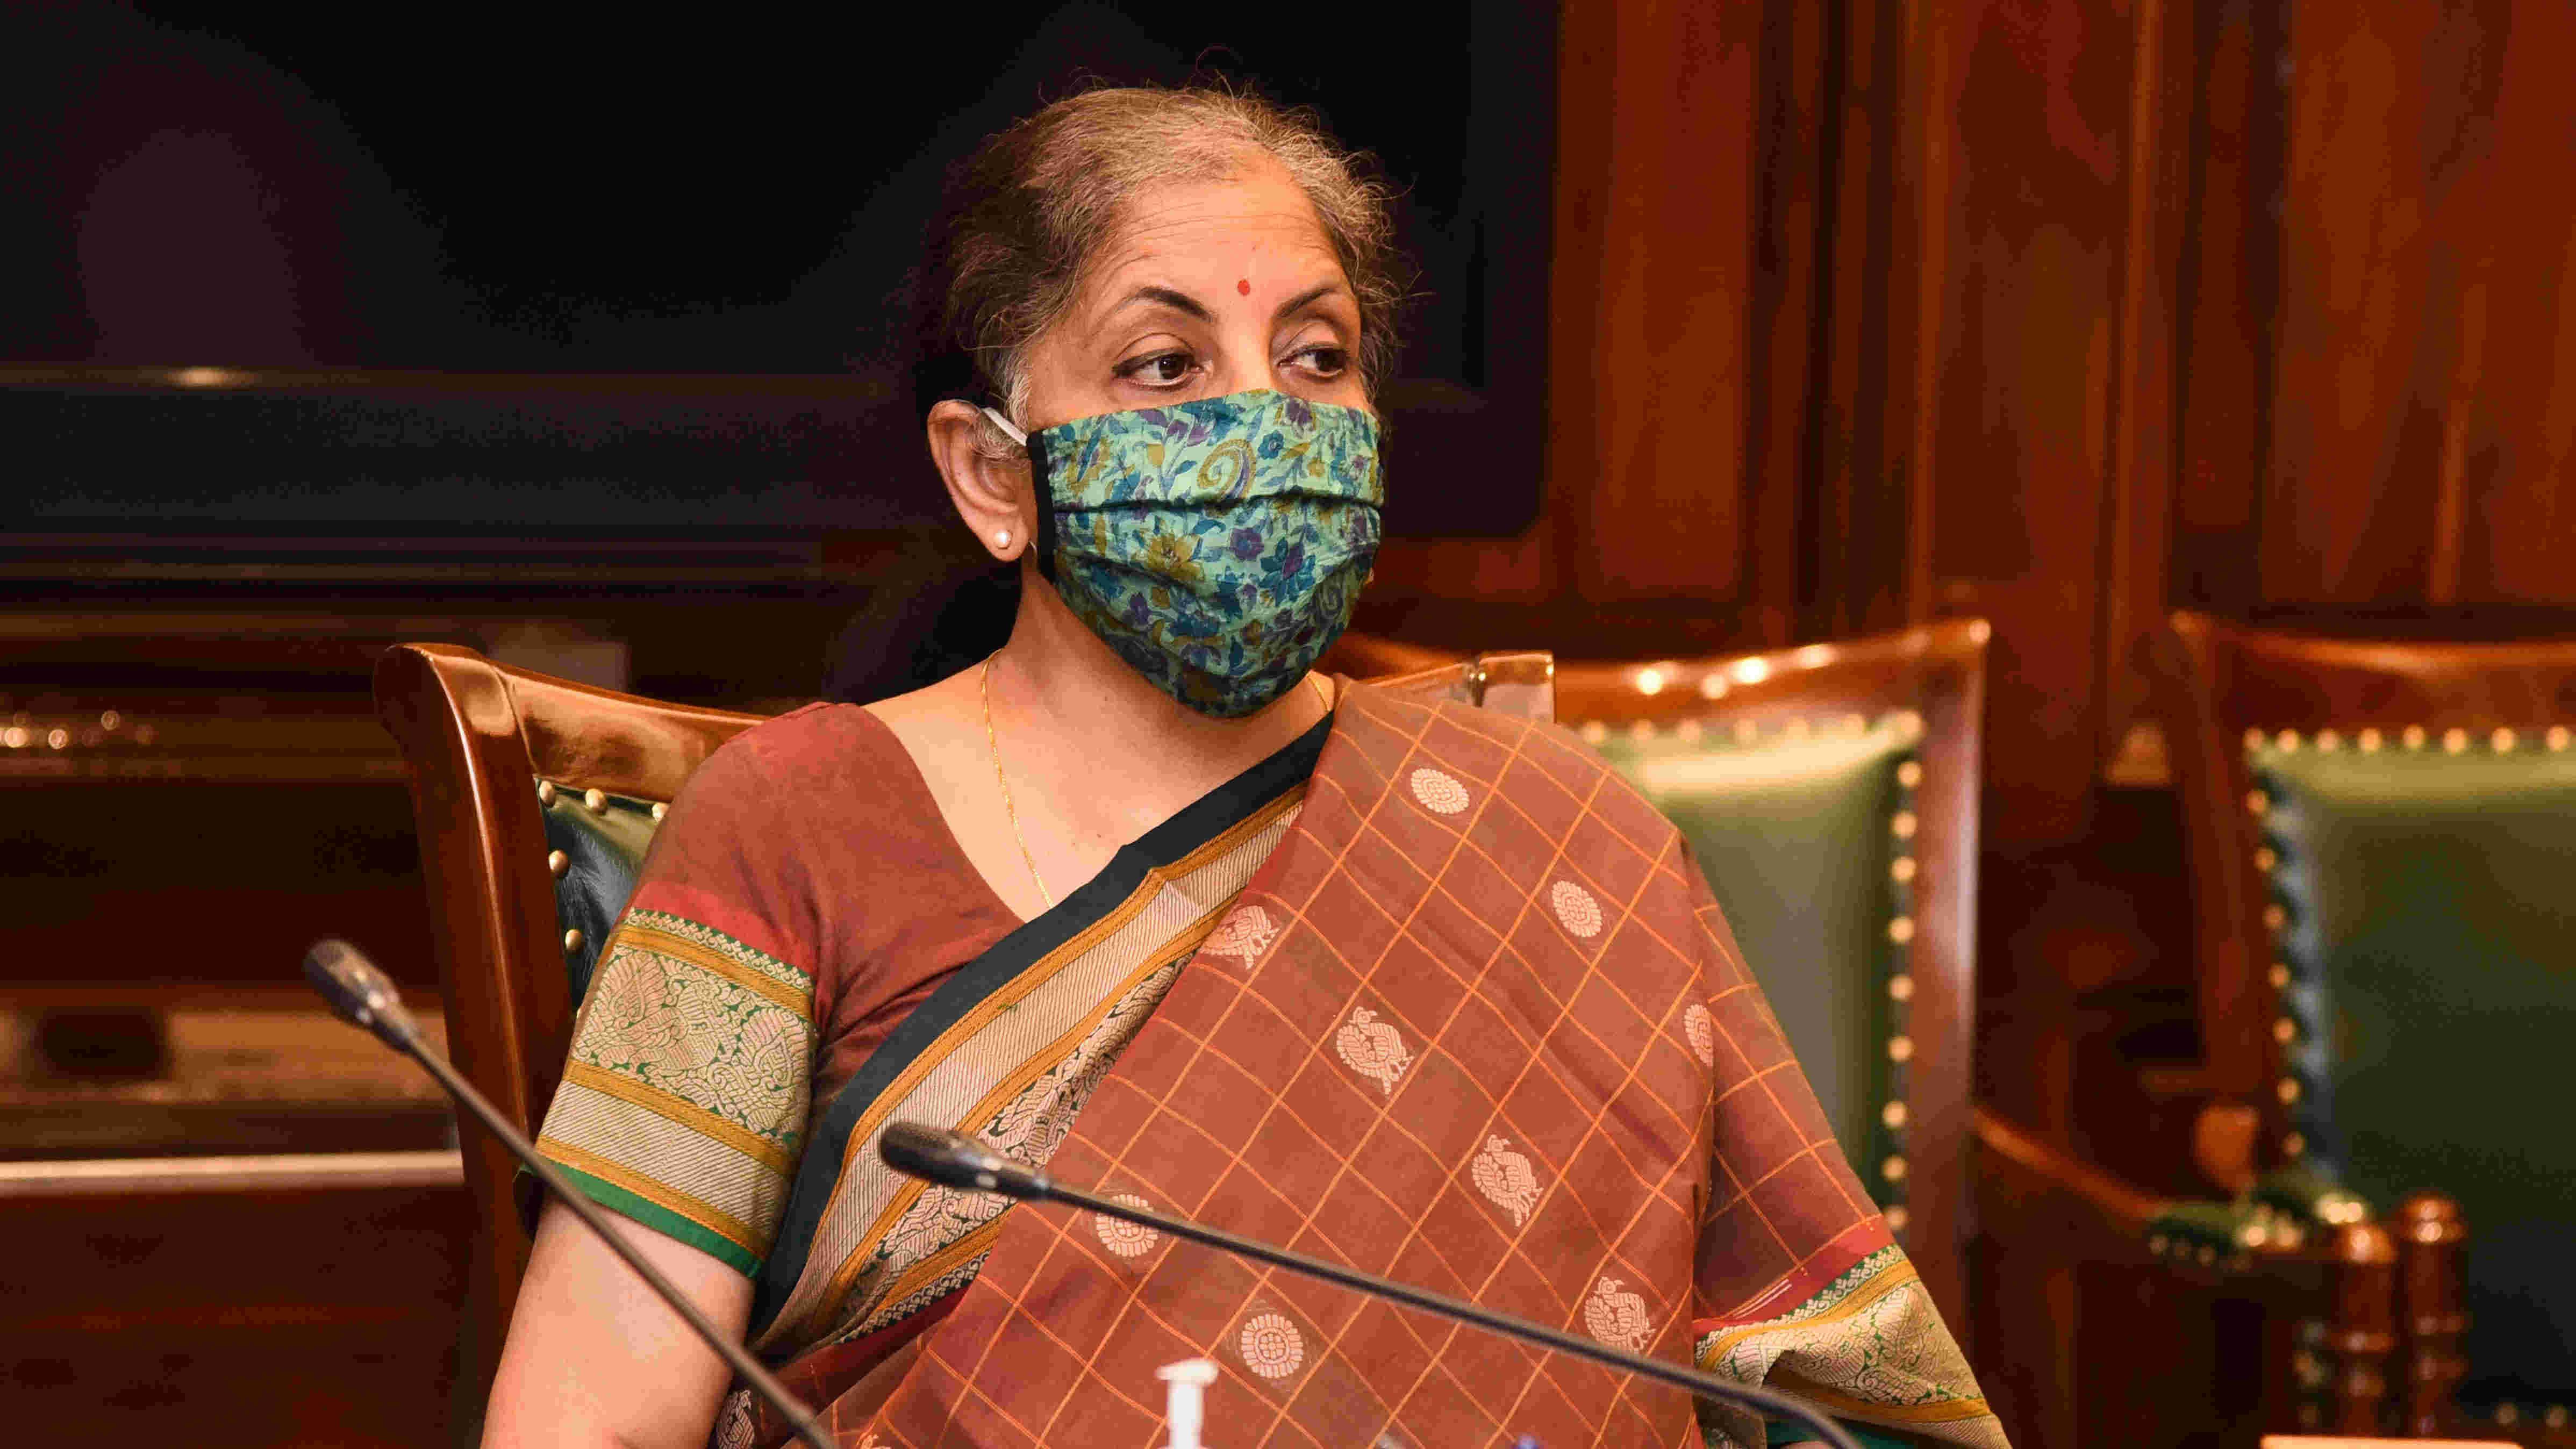 Union Finance Minister Nirmala Sitharaman during a review meeting with heads of banks and NBFCs, at North Block in New Delhi, Thursday, Sept. 3, 2020.